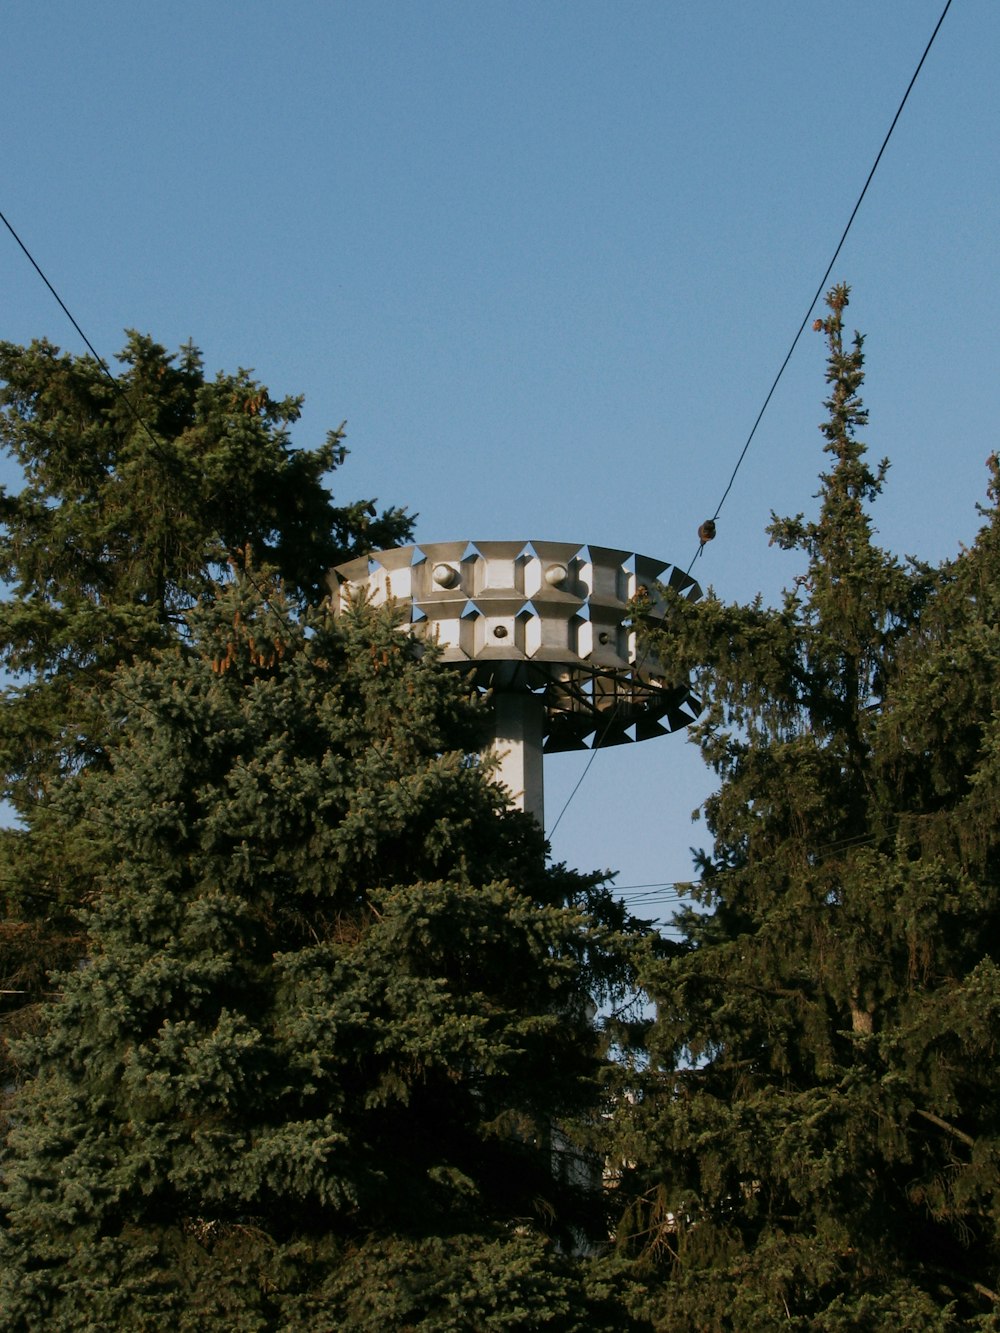 a person riding a ski lift over a forest